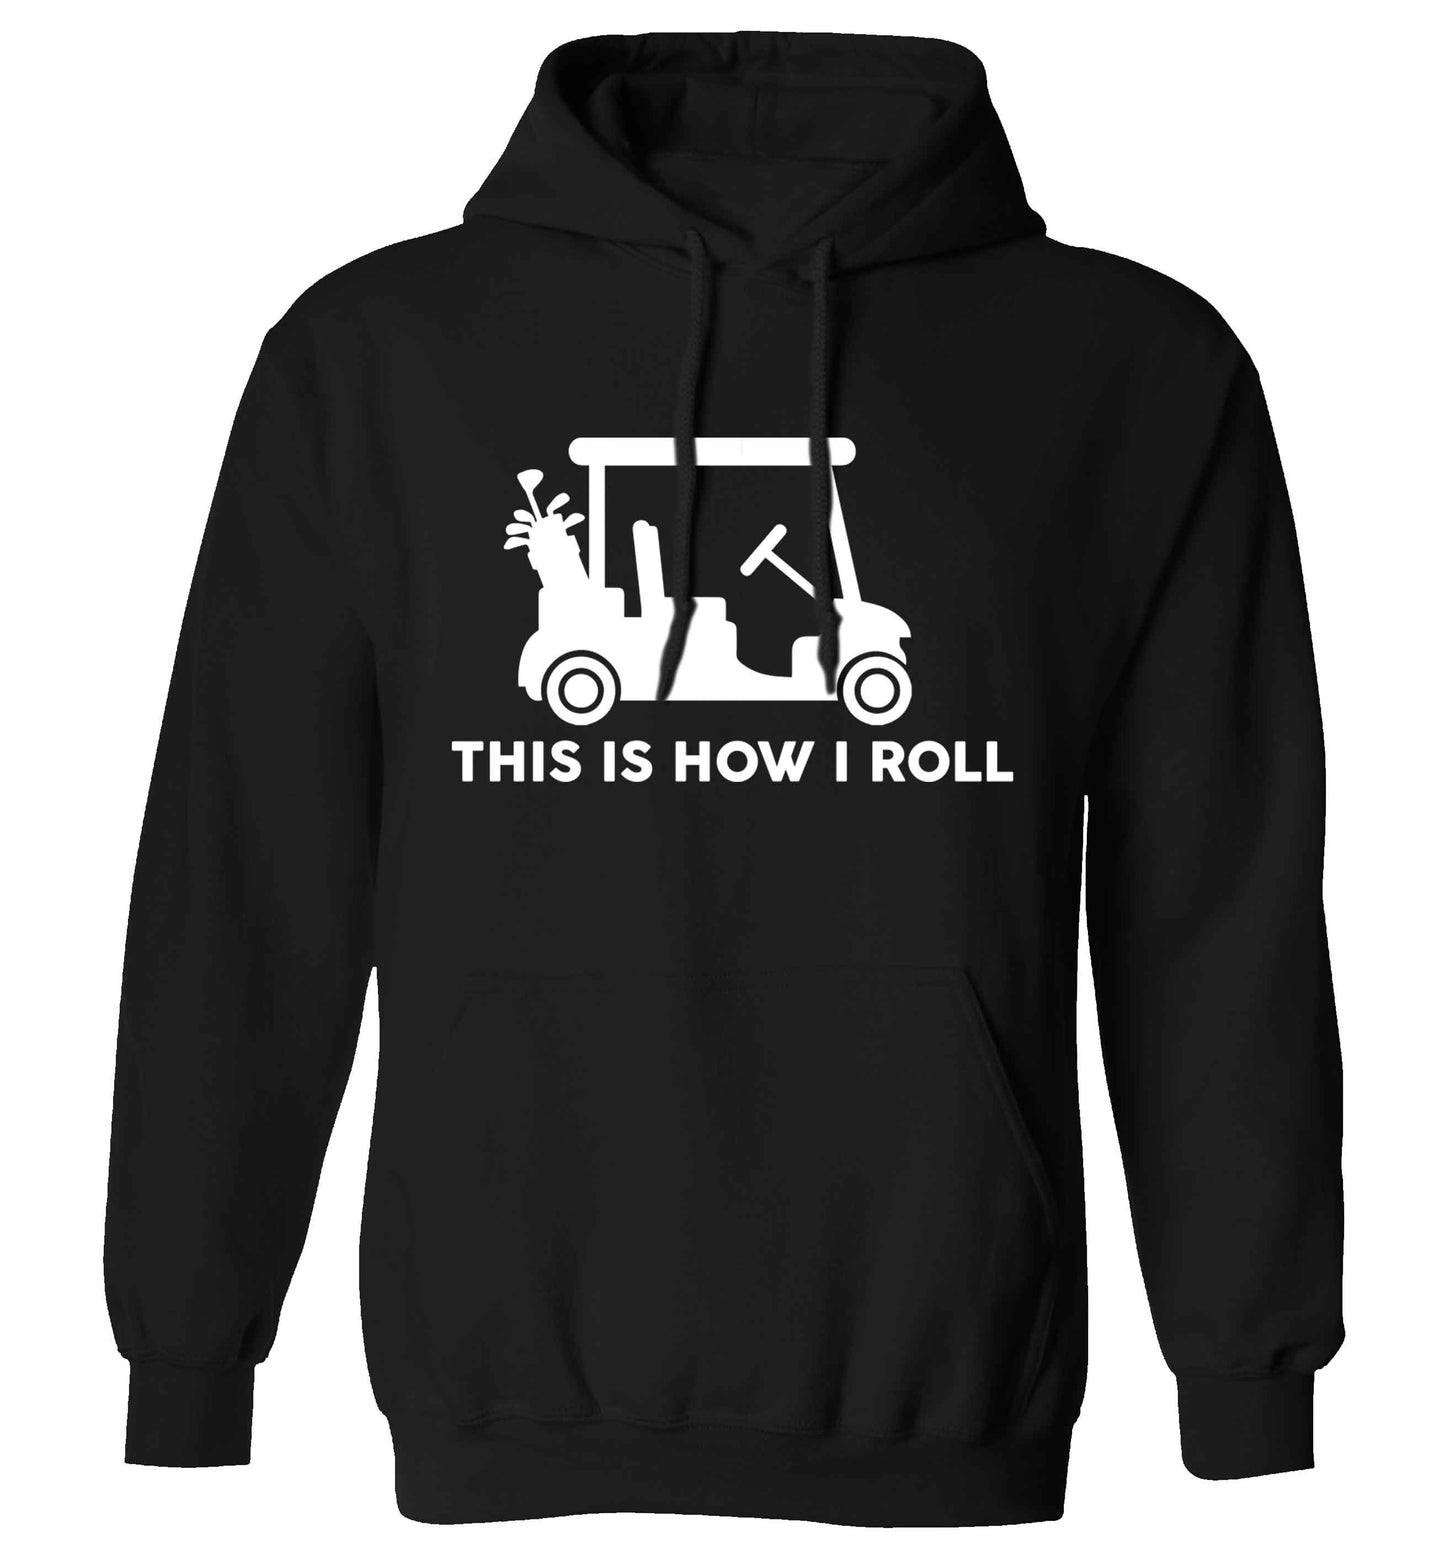 This is how I roll golf cart adults unisex black hoodie 2XL